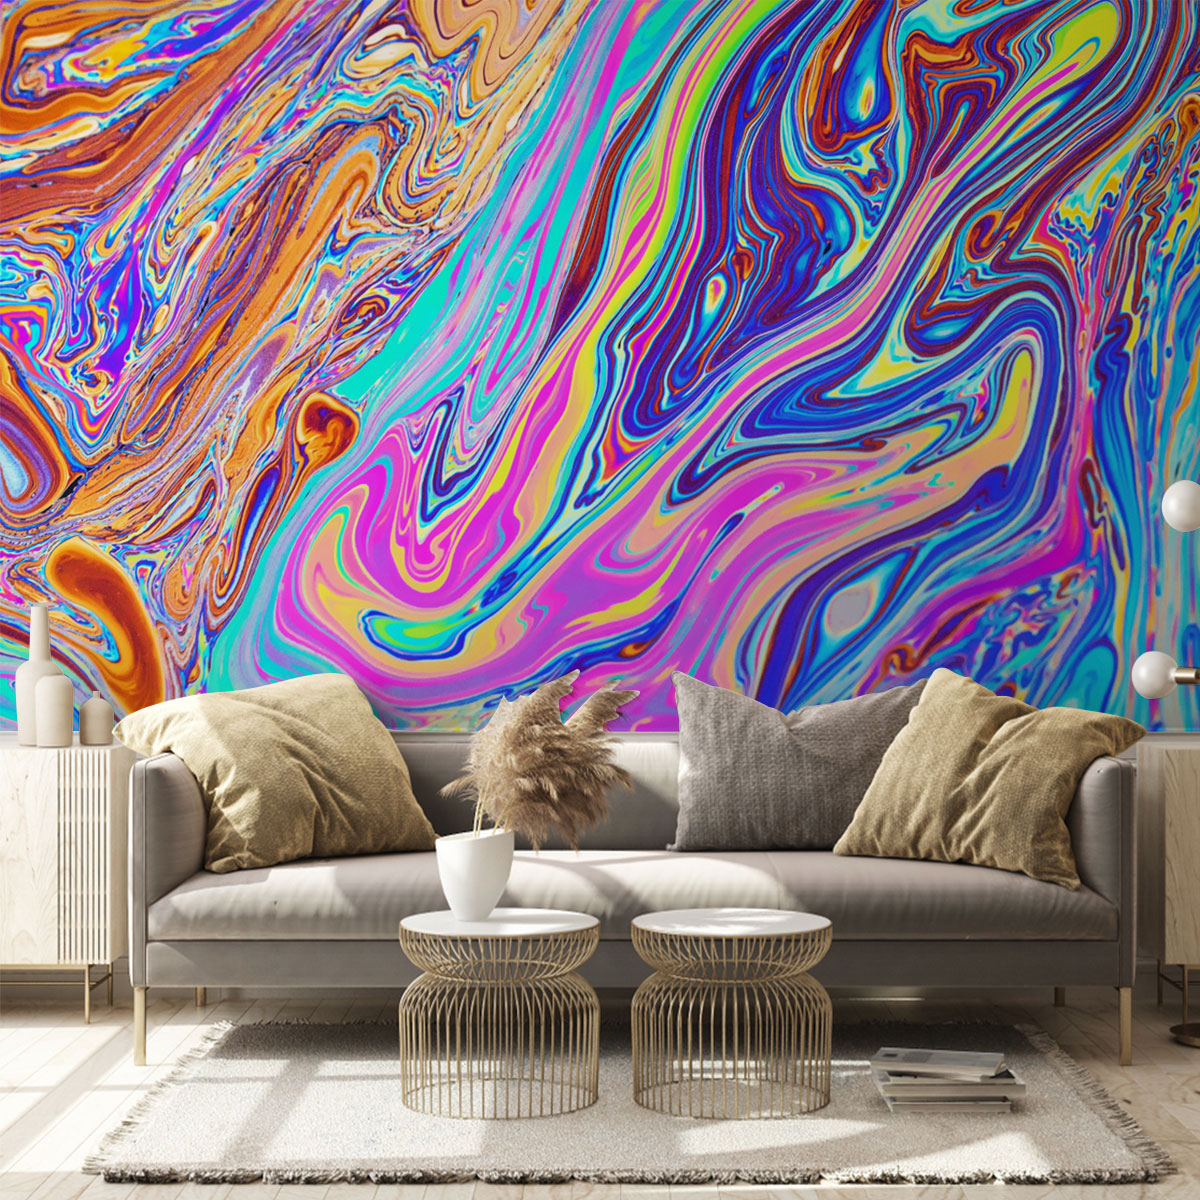 Colorful Psychedelic Wall Mural_1_2.1